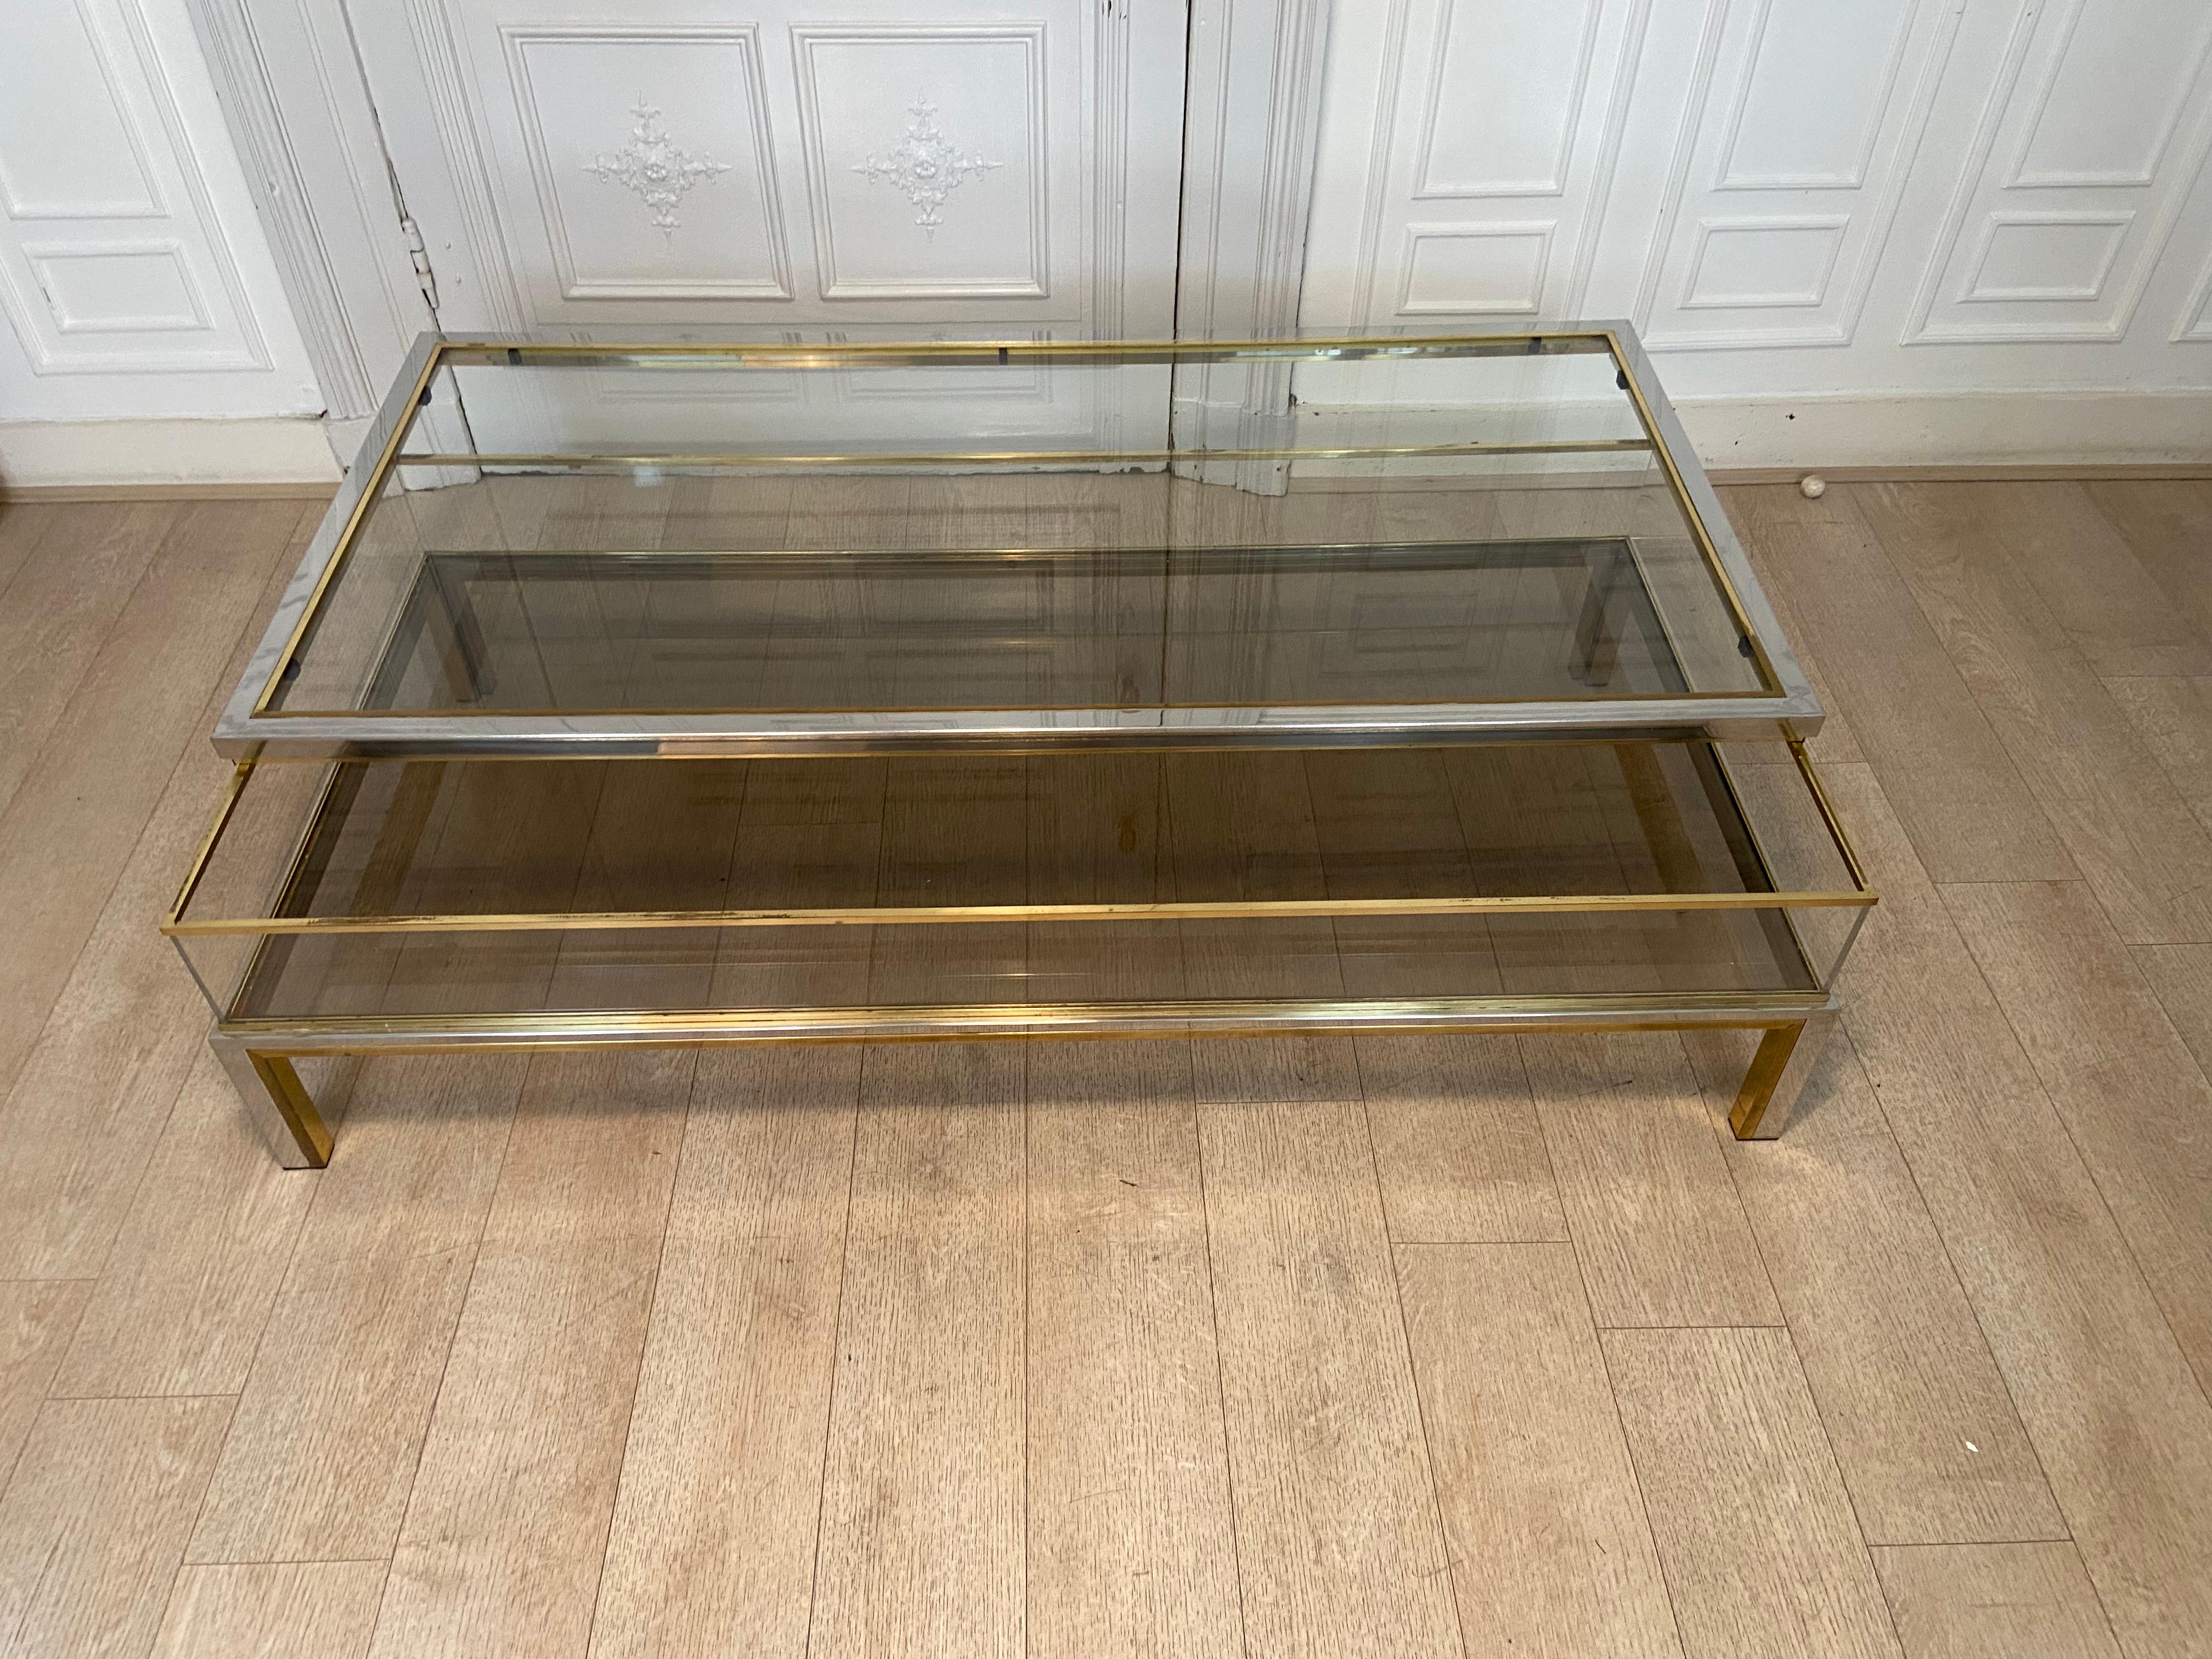 European Midcentury Brass, Chrome, and Glass Showcase Coffee Table For Sale